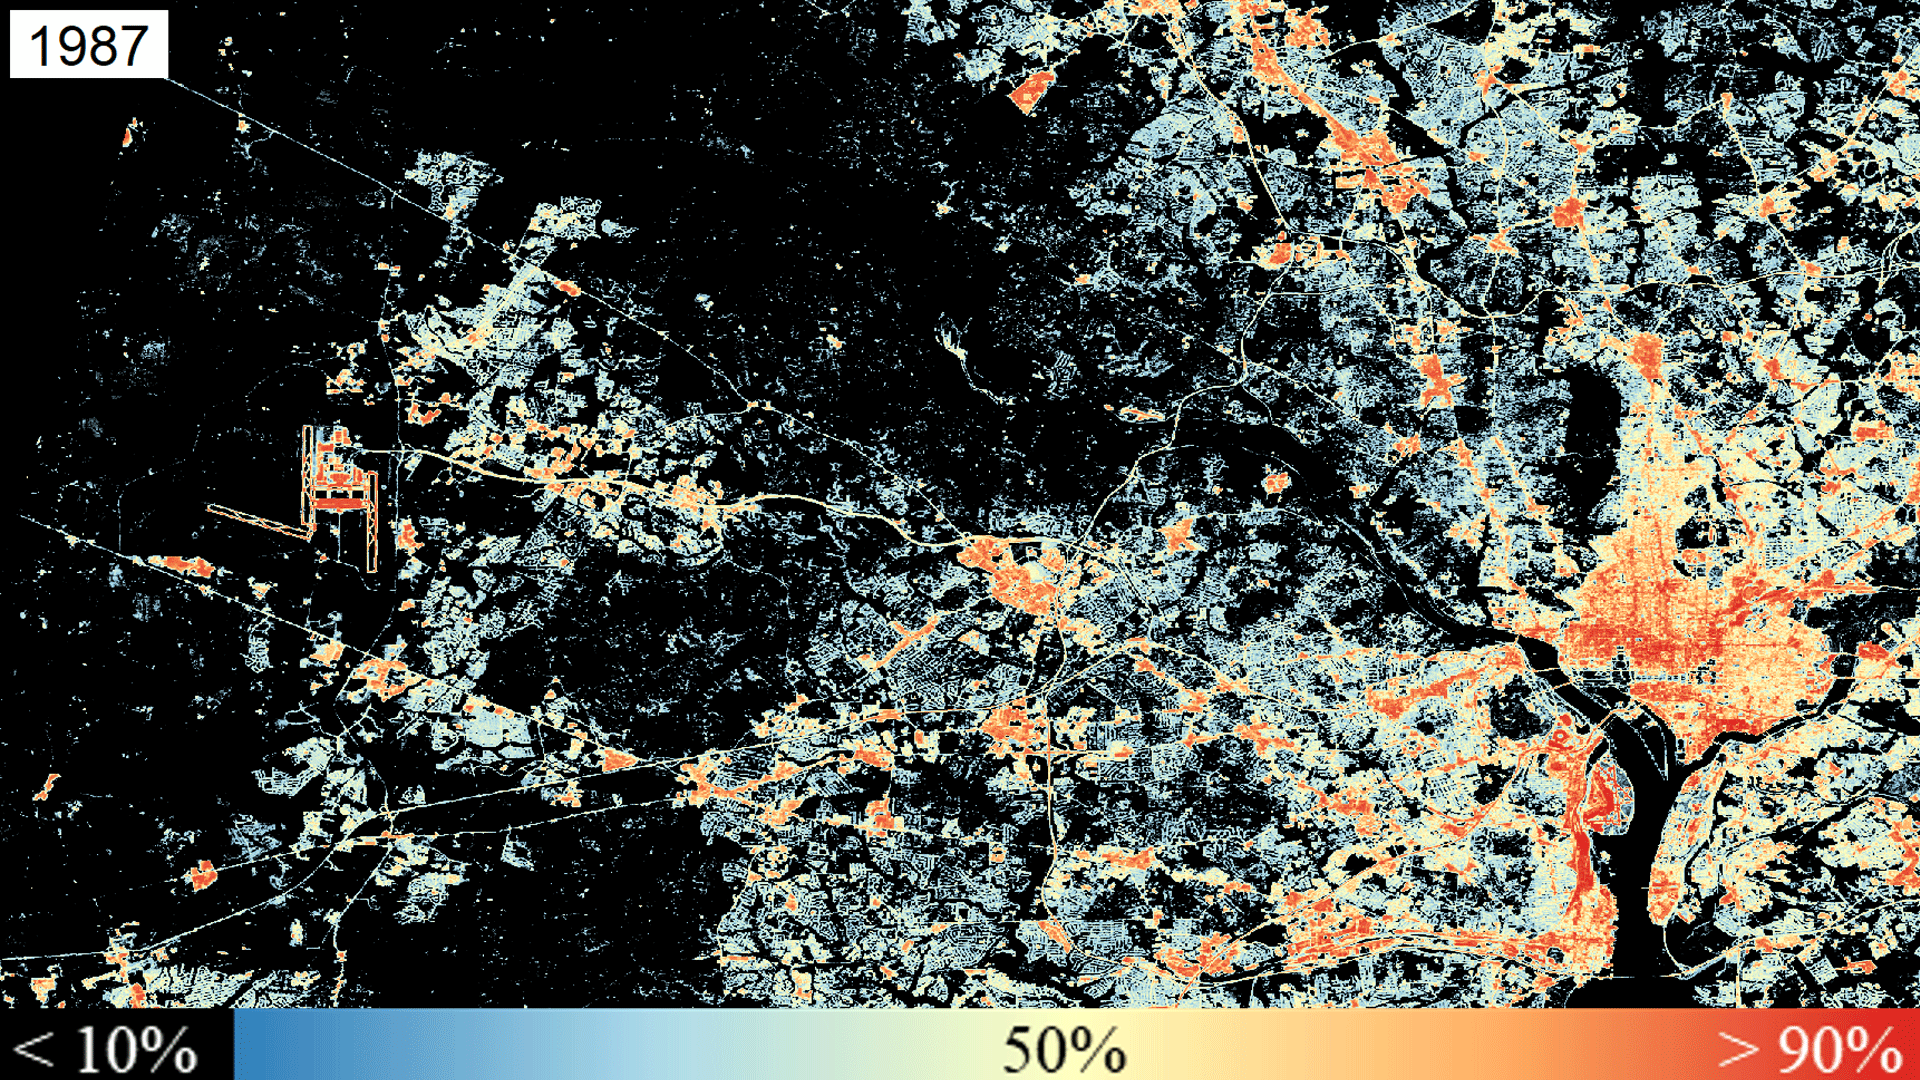 Satellite animation showing urban growth in the Washington, D.C. area.